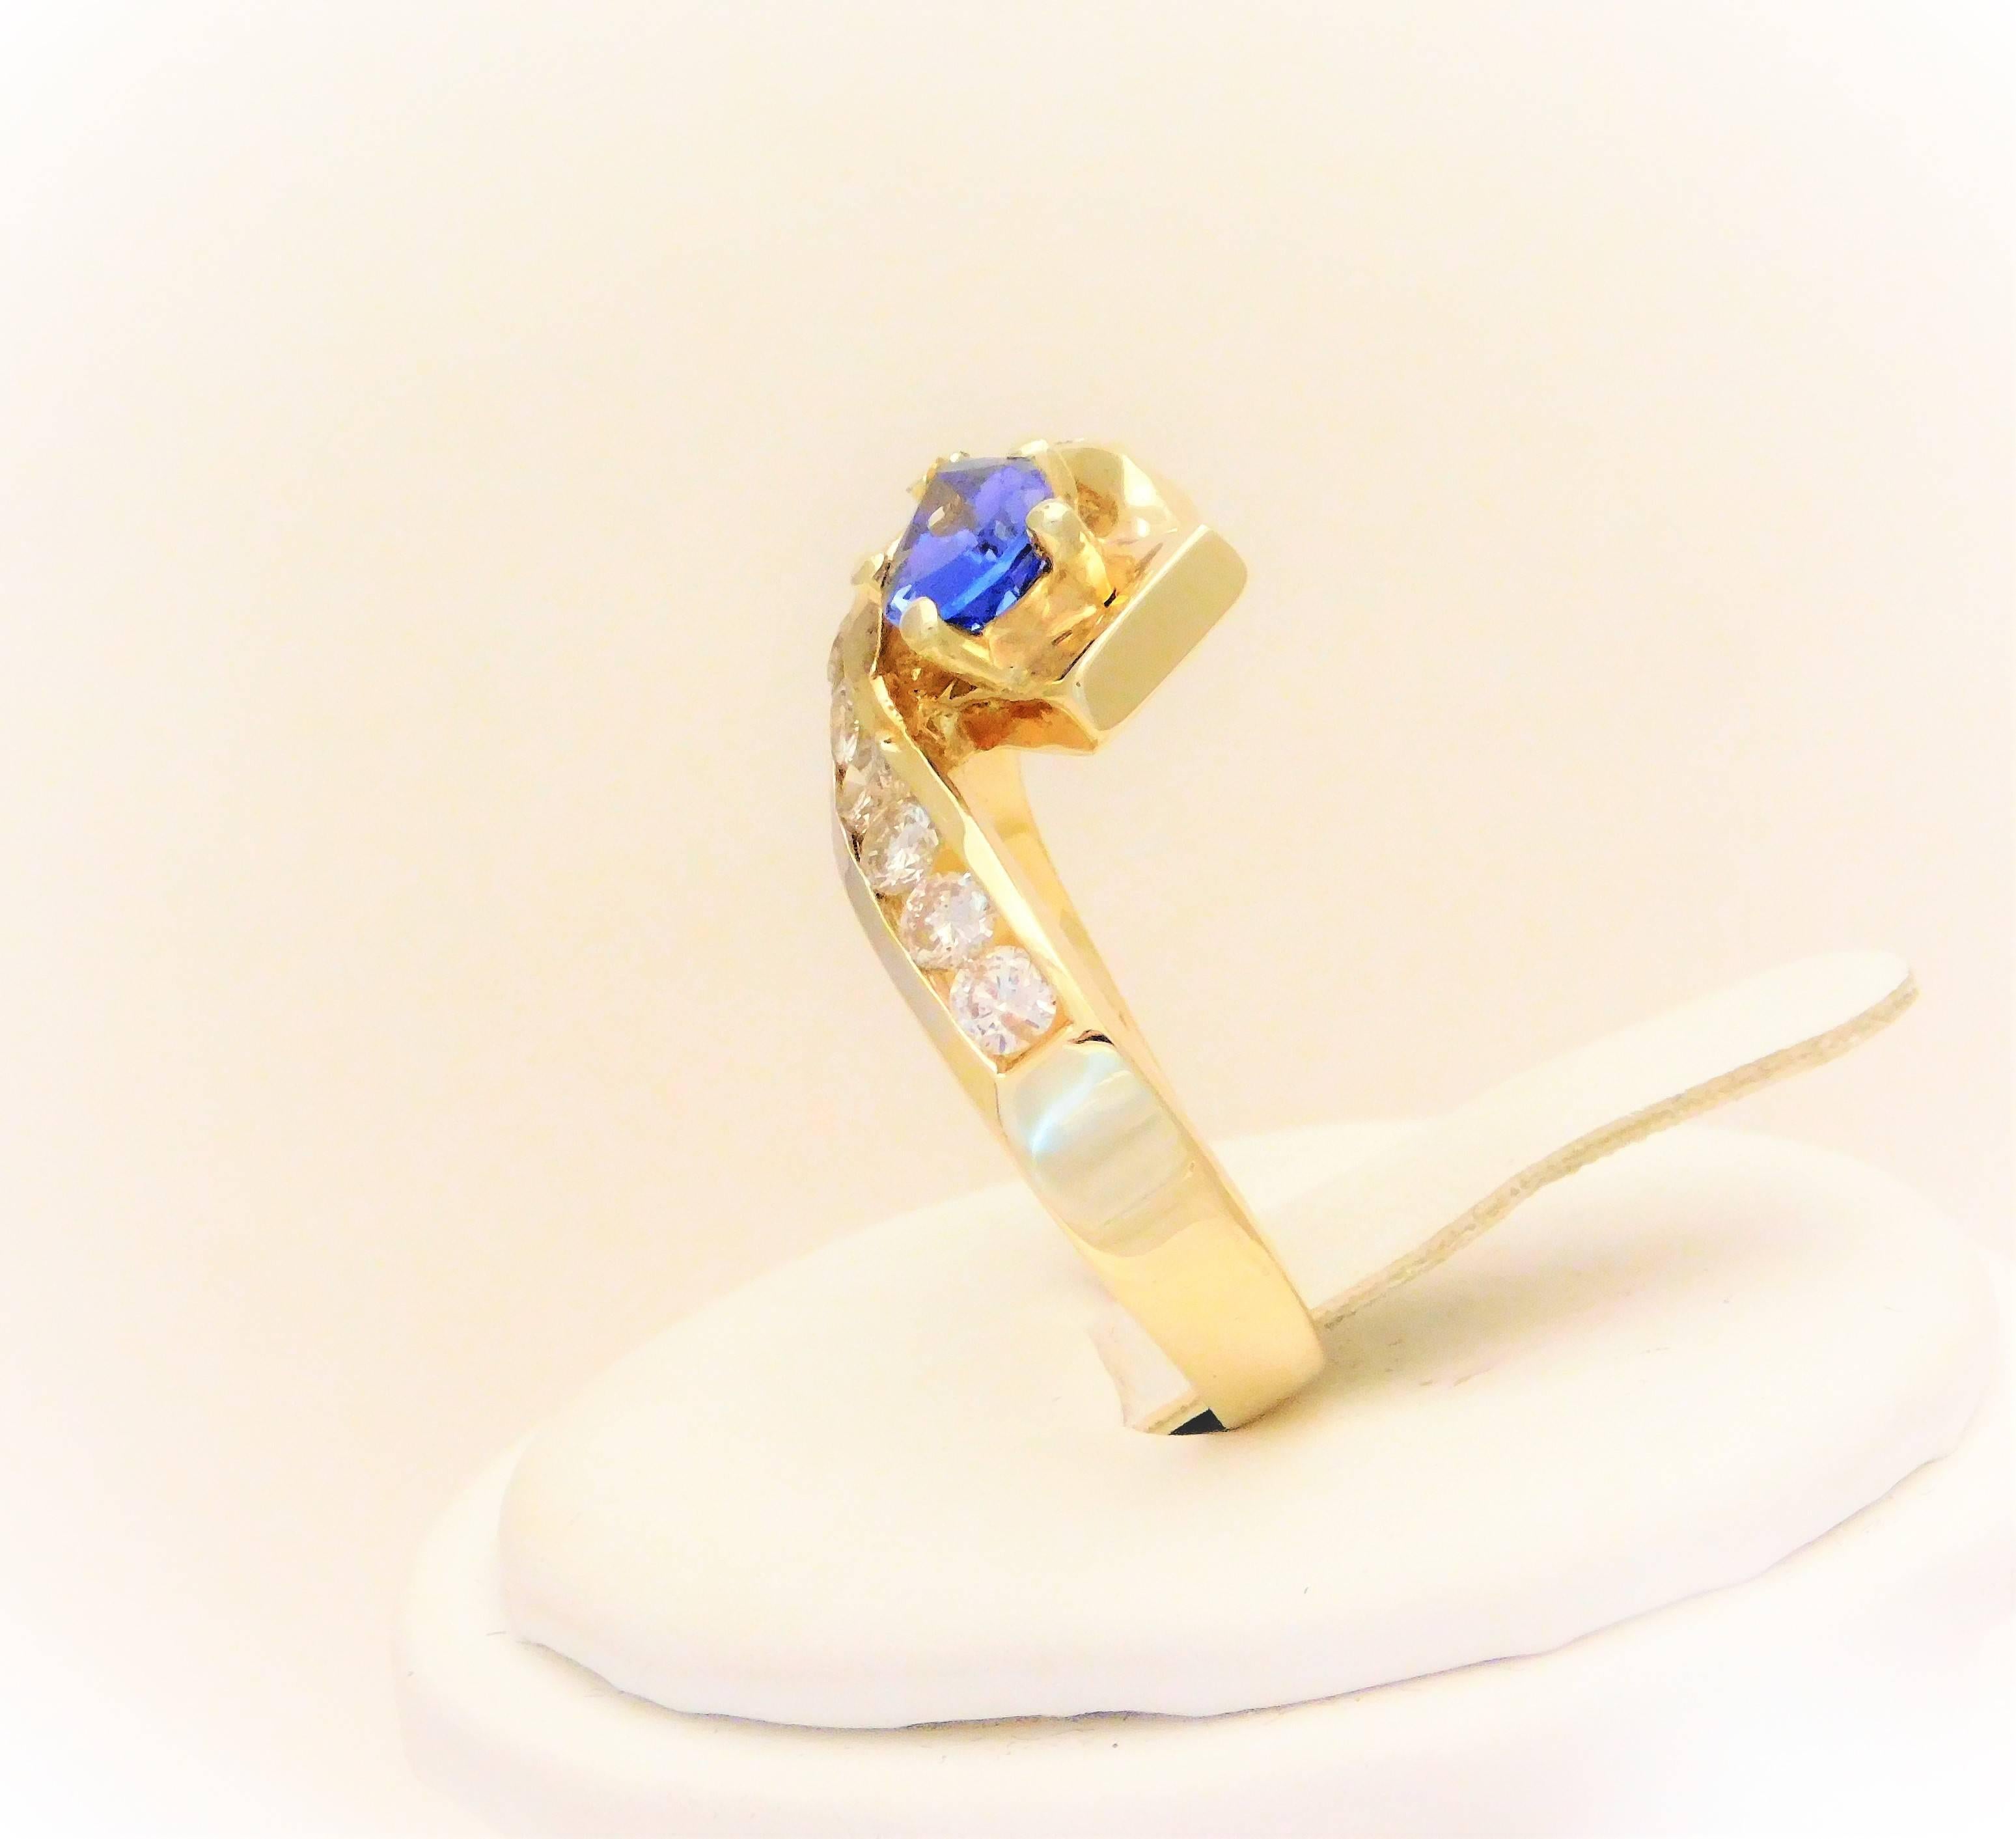 Vintage 2.05 Carat Pear-Cut Tanzanite and Diamond Cocktail Ring For Sale 1